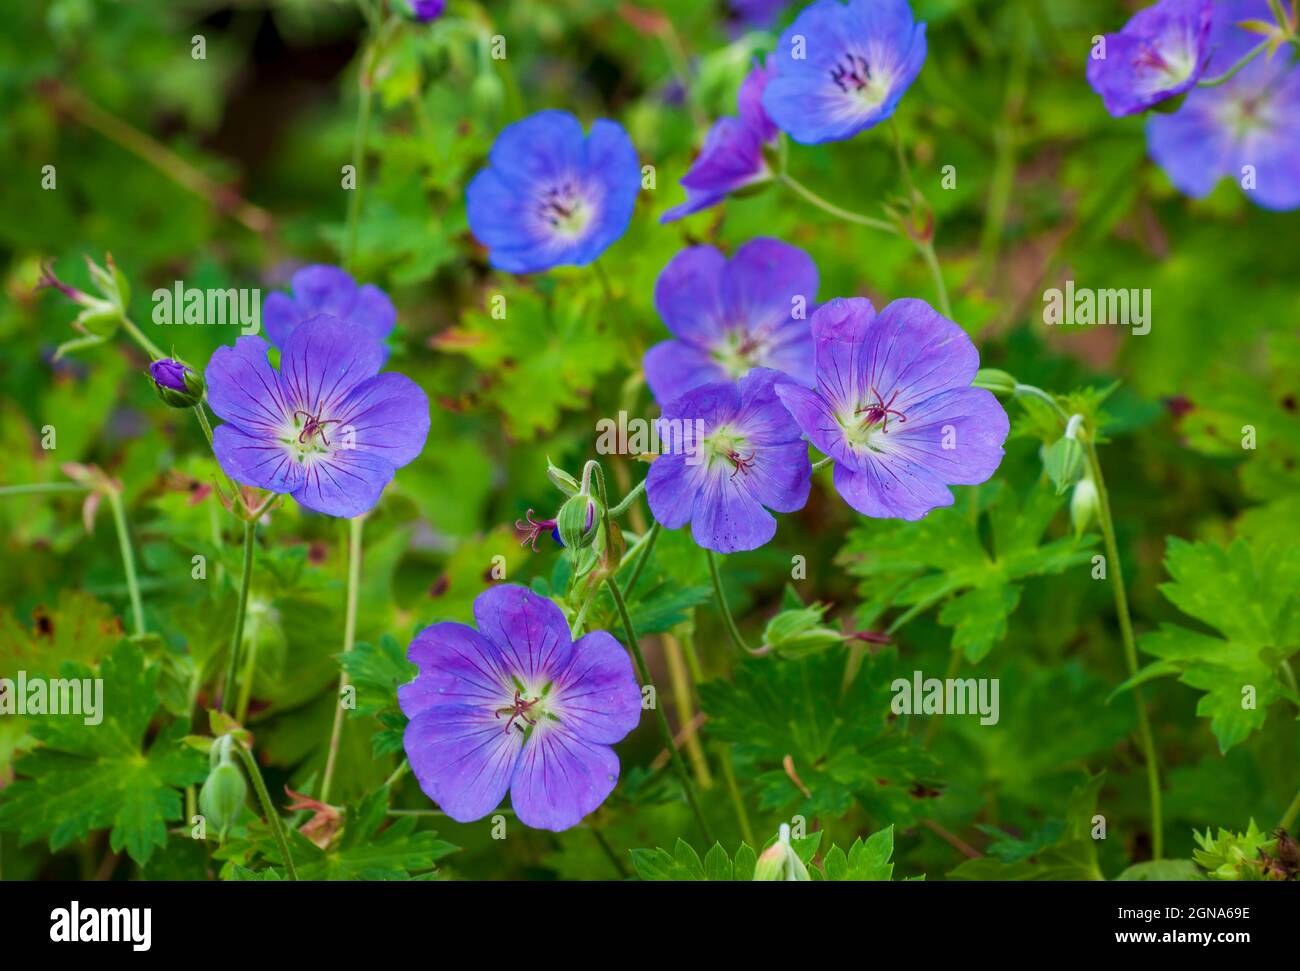 Buxton's Blue (Geranium wallichianum) - a prolific bloomer with large violet-blue flowers and small white centers. Cathedral of the Pines, Rindge, NH Stock Photo